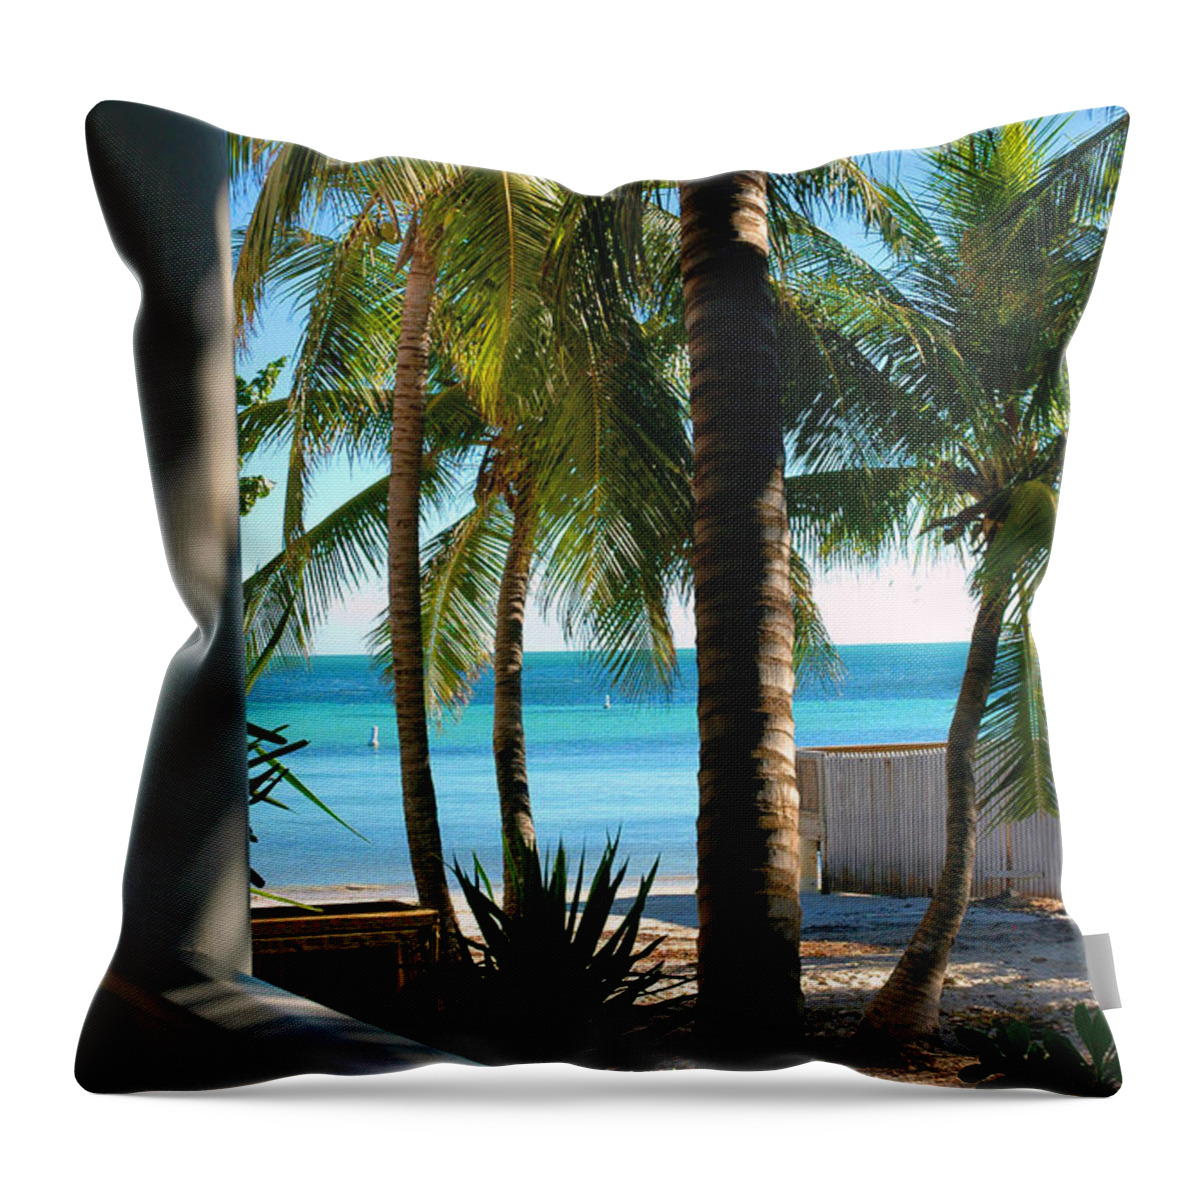 Photos Of Key West Throw Pillow featuring the photograph Louie's Backyard by Susanne Van Hulst